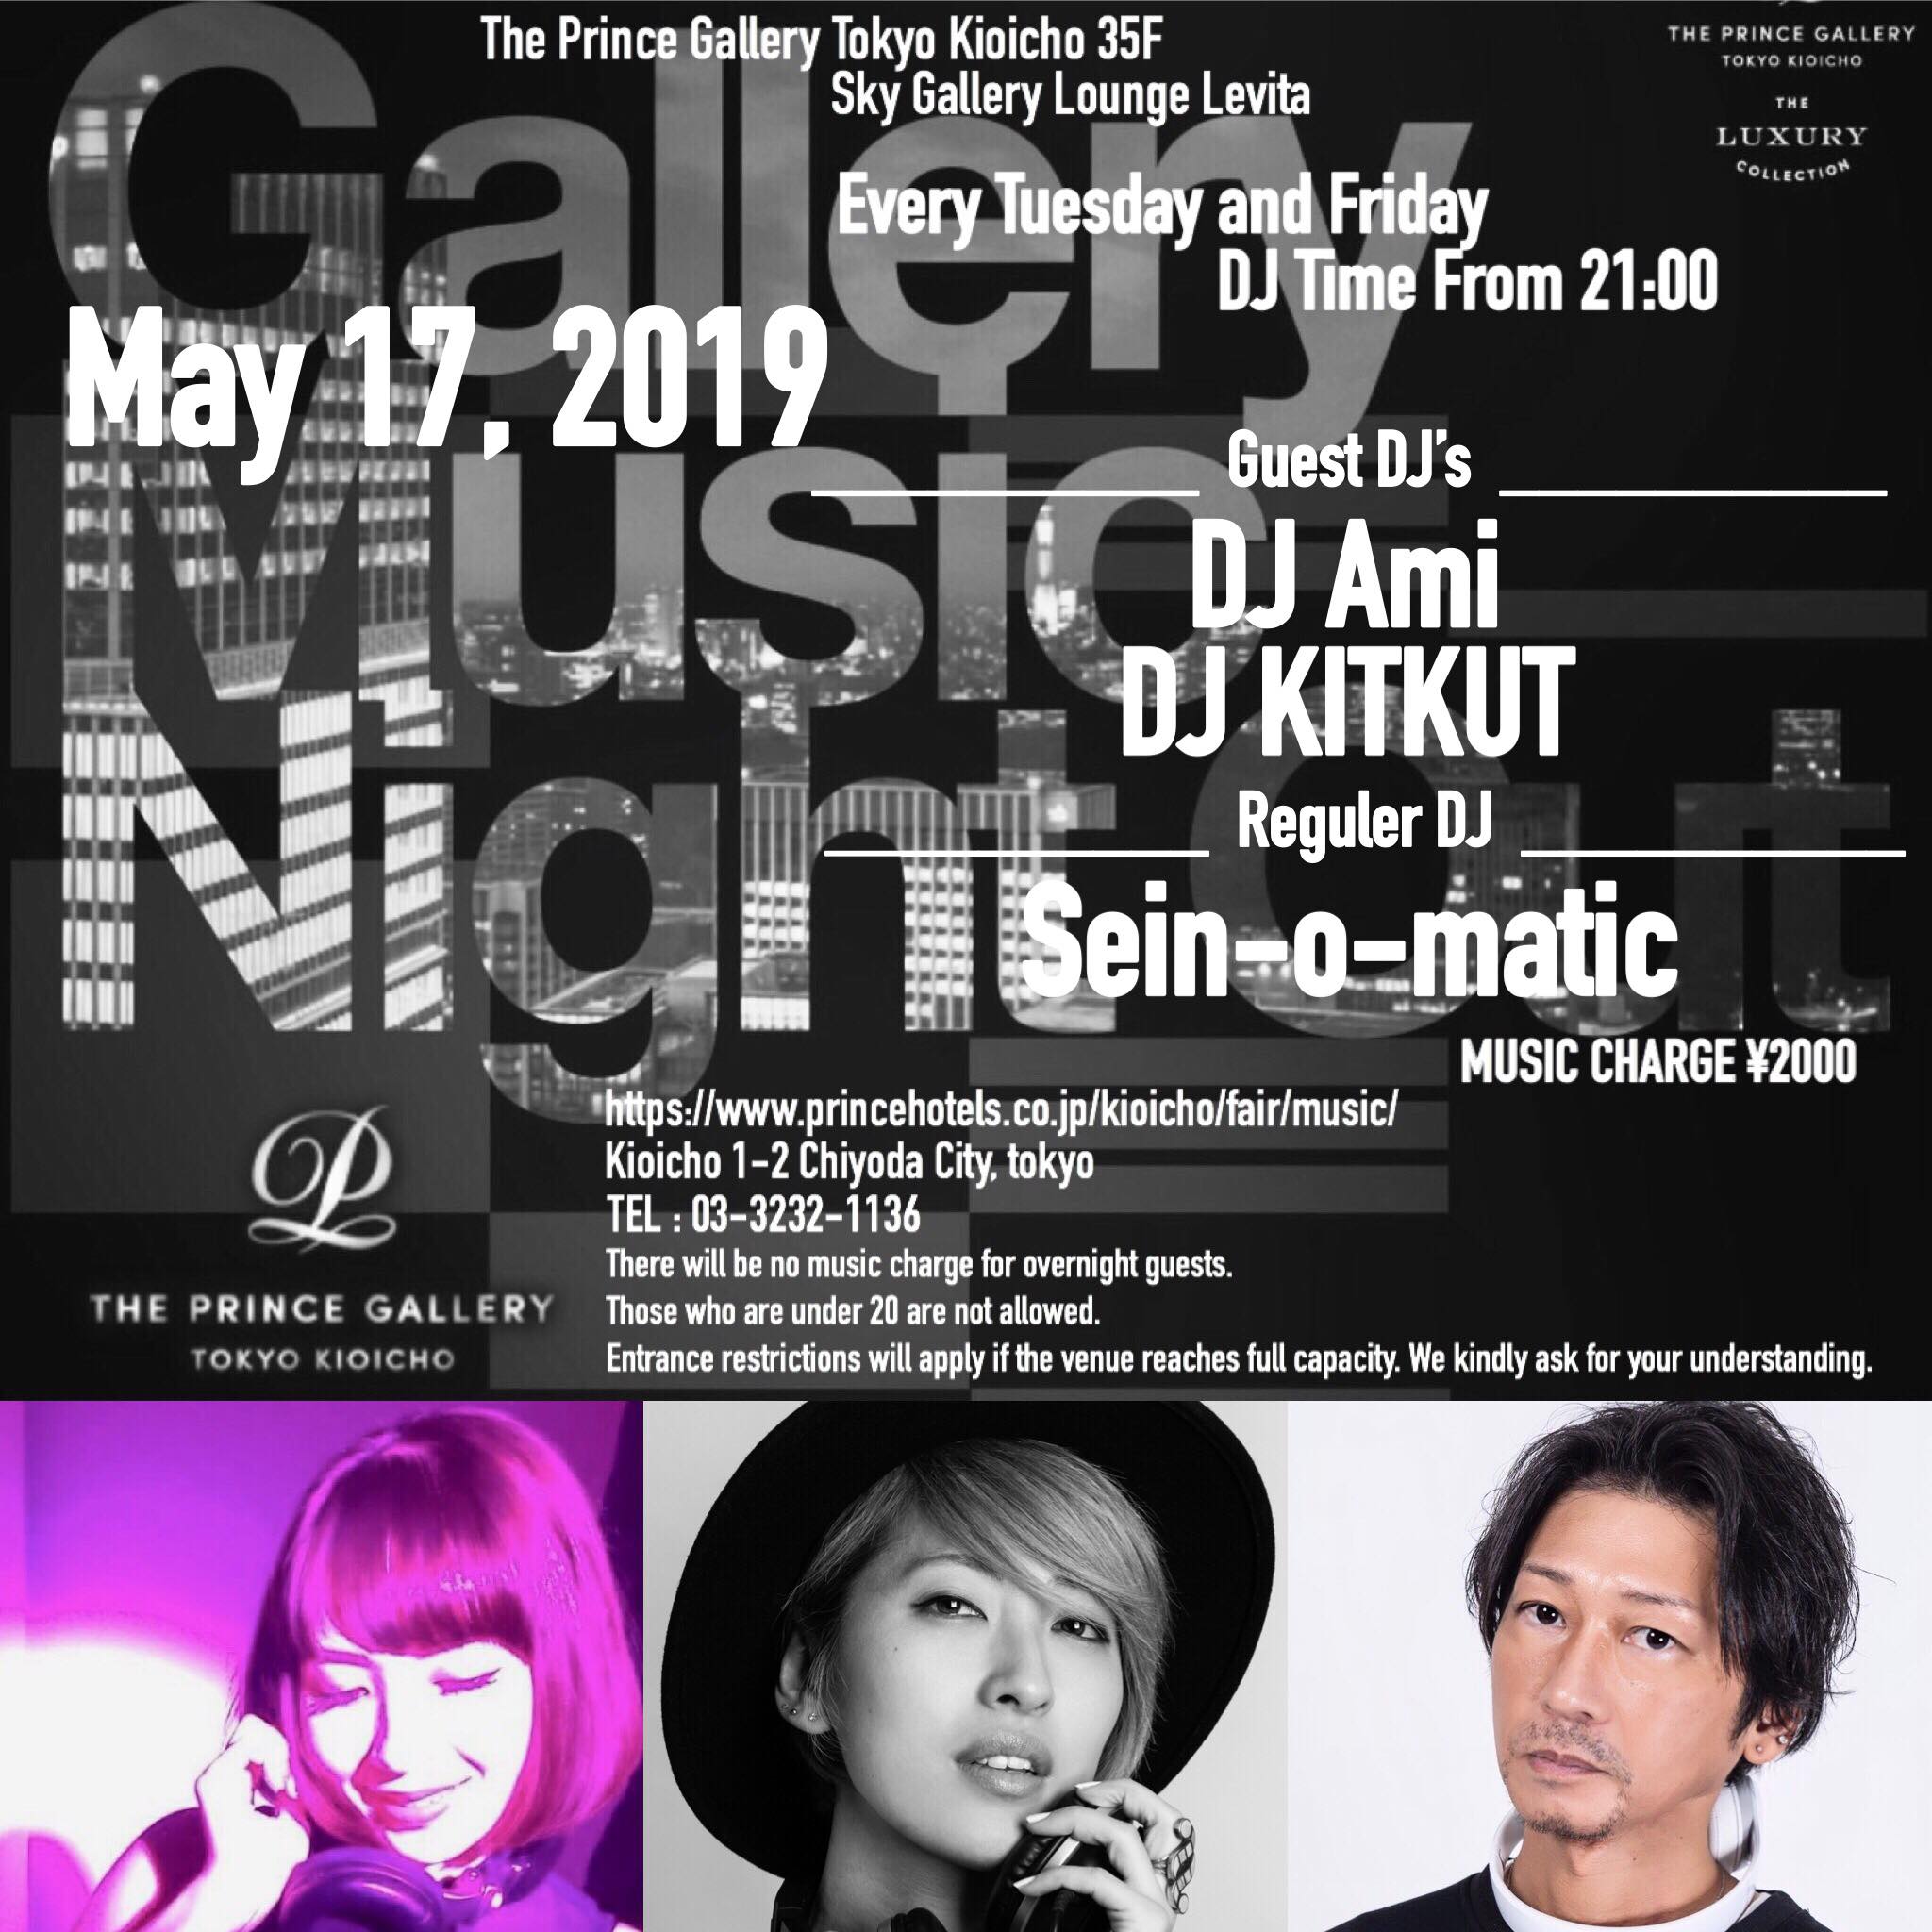 2019/5/17(fri) Gallery Music Night Out @ The Prince Gallery